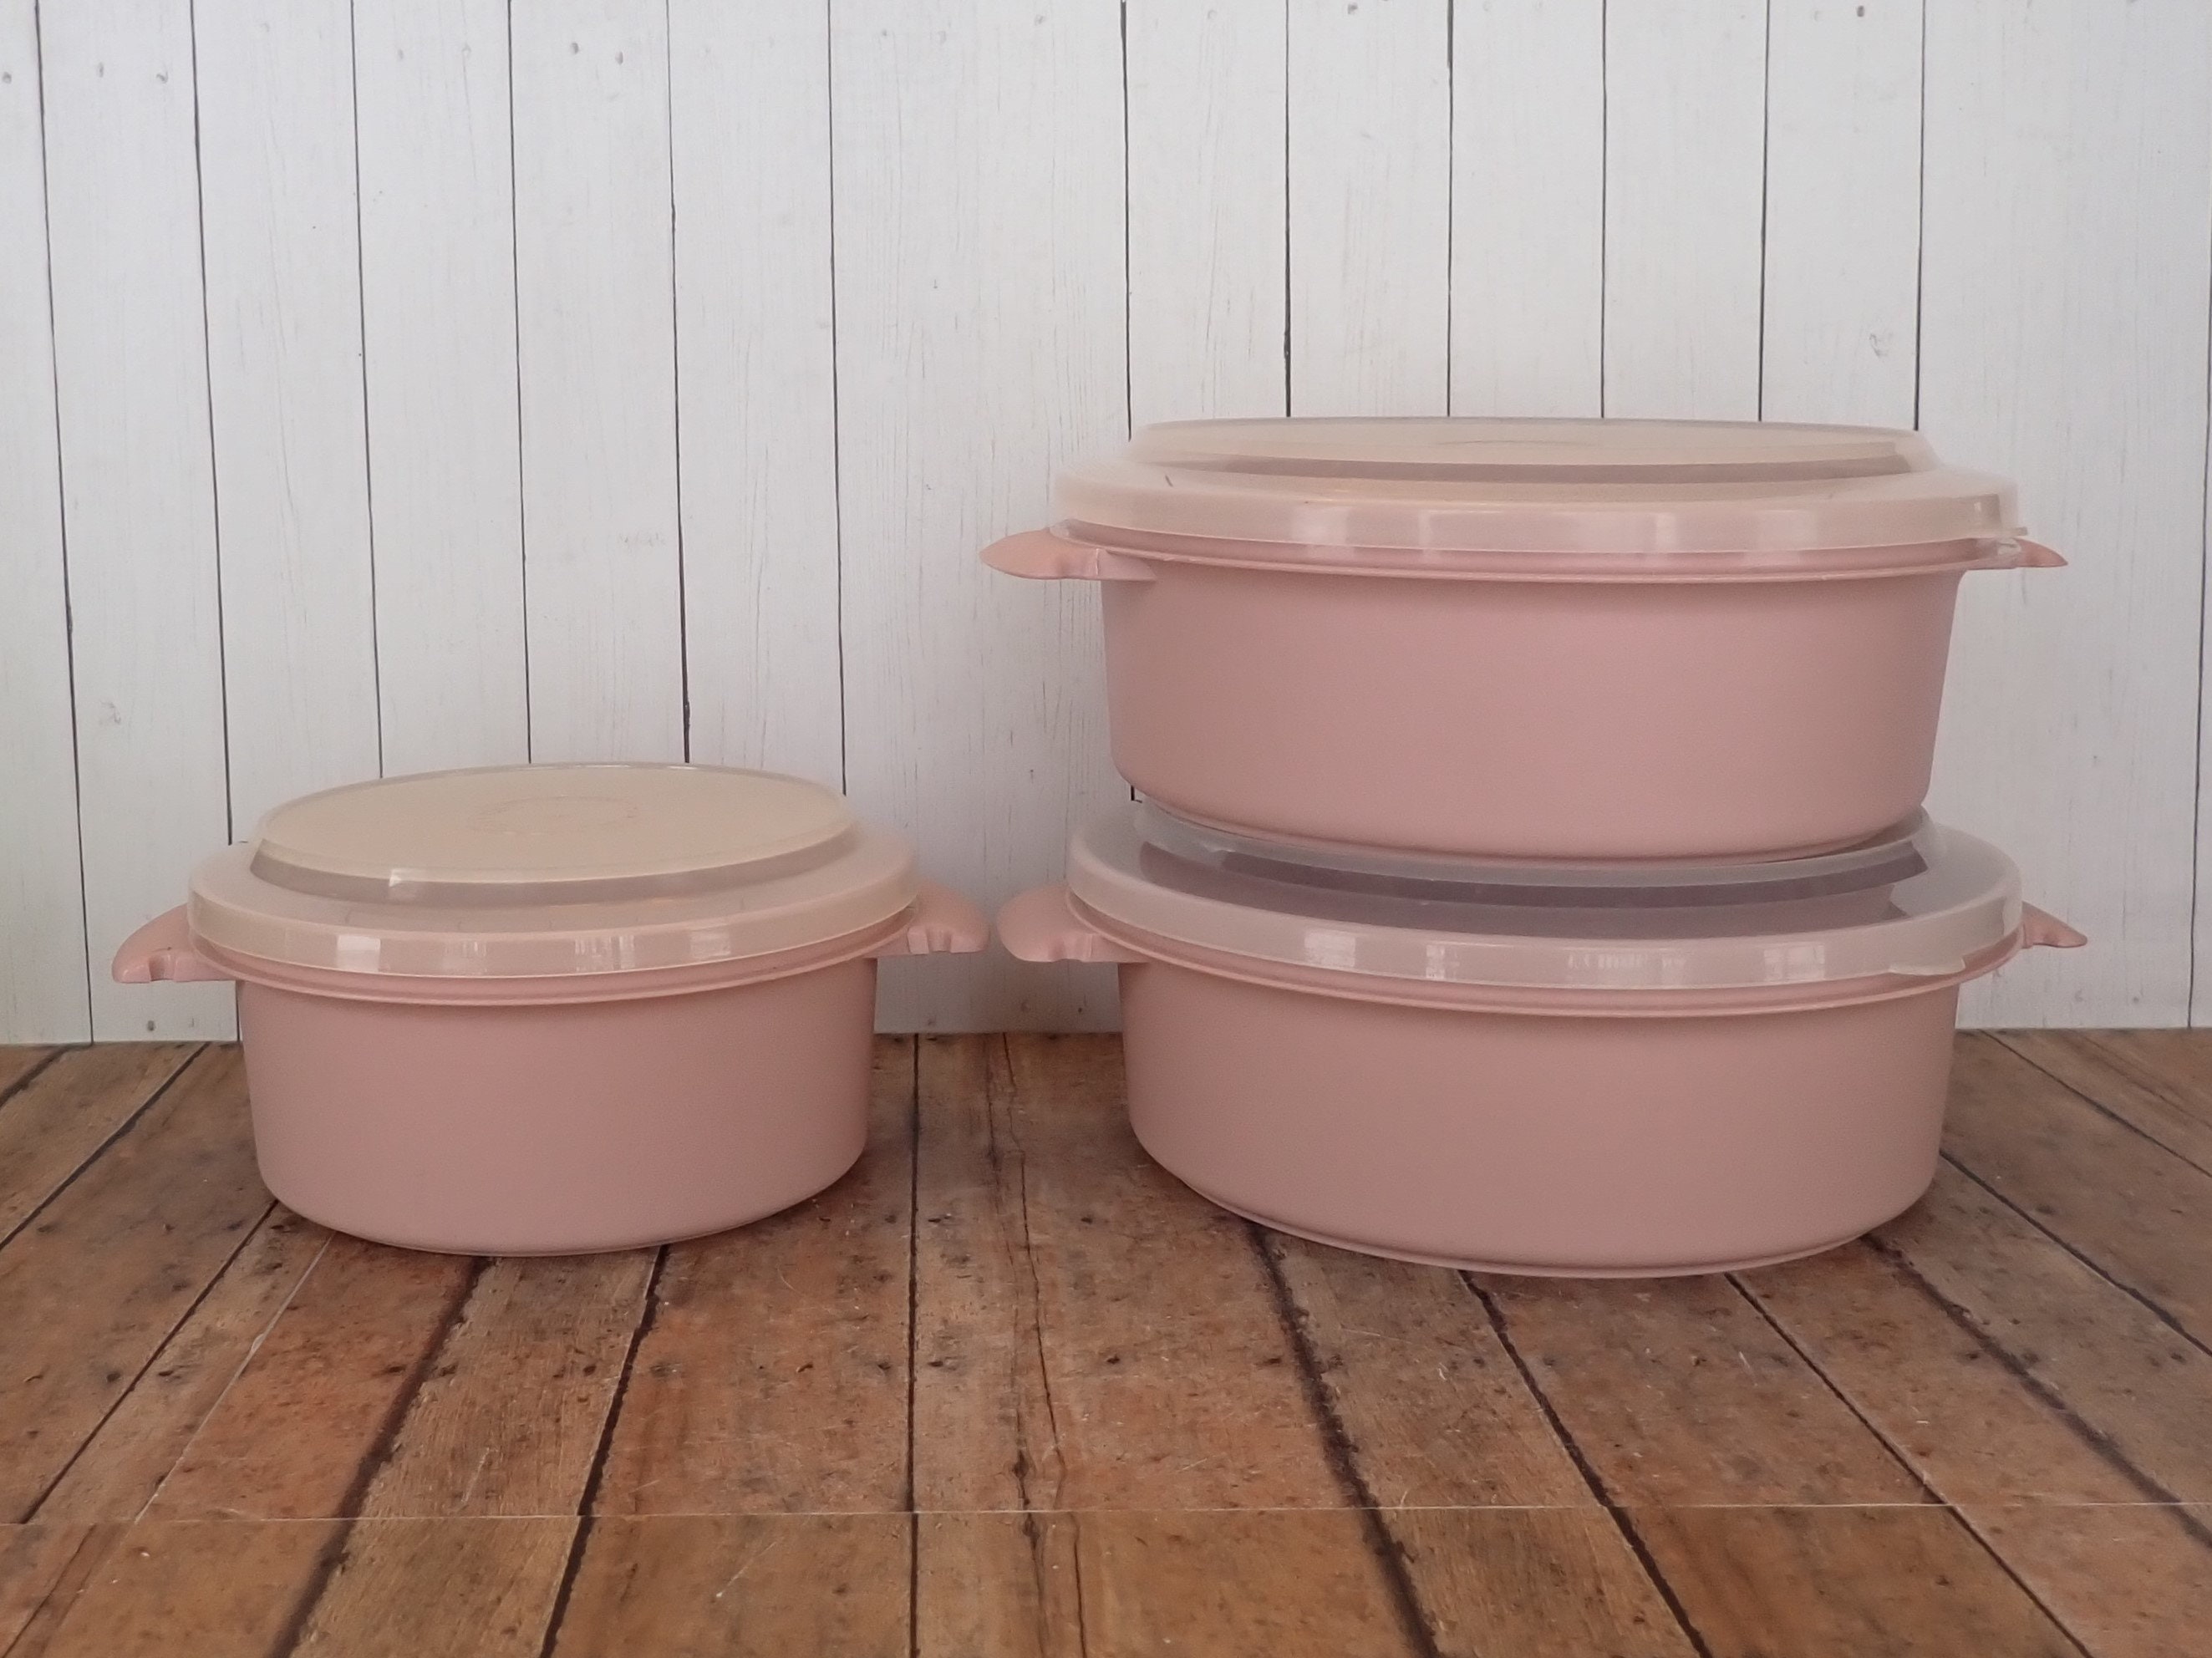 eBlueJay: VINTAGE TUPPERWARE WHITE CANISTER SET OF 3 WITH ROSE HOT PINK LIDS